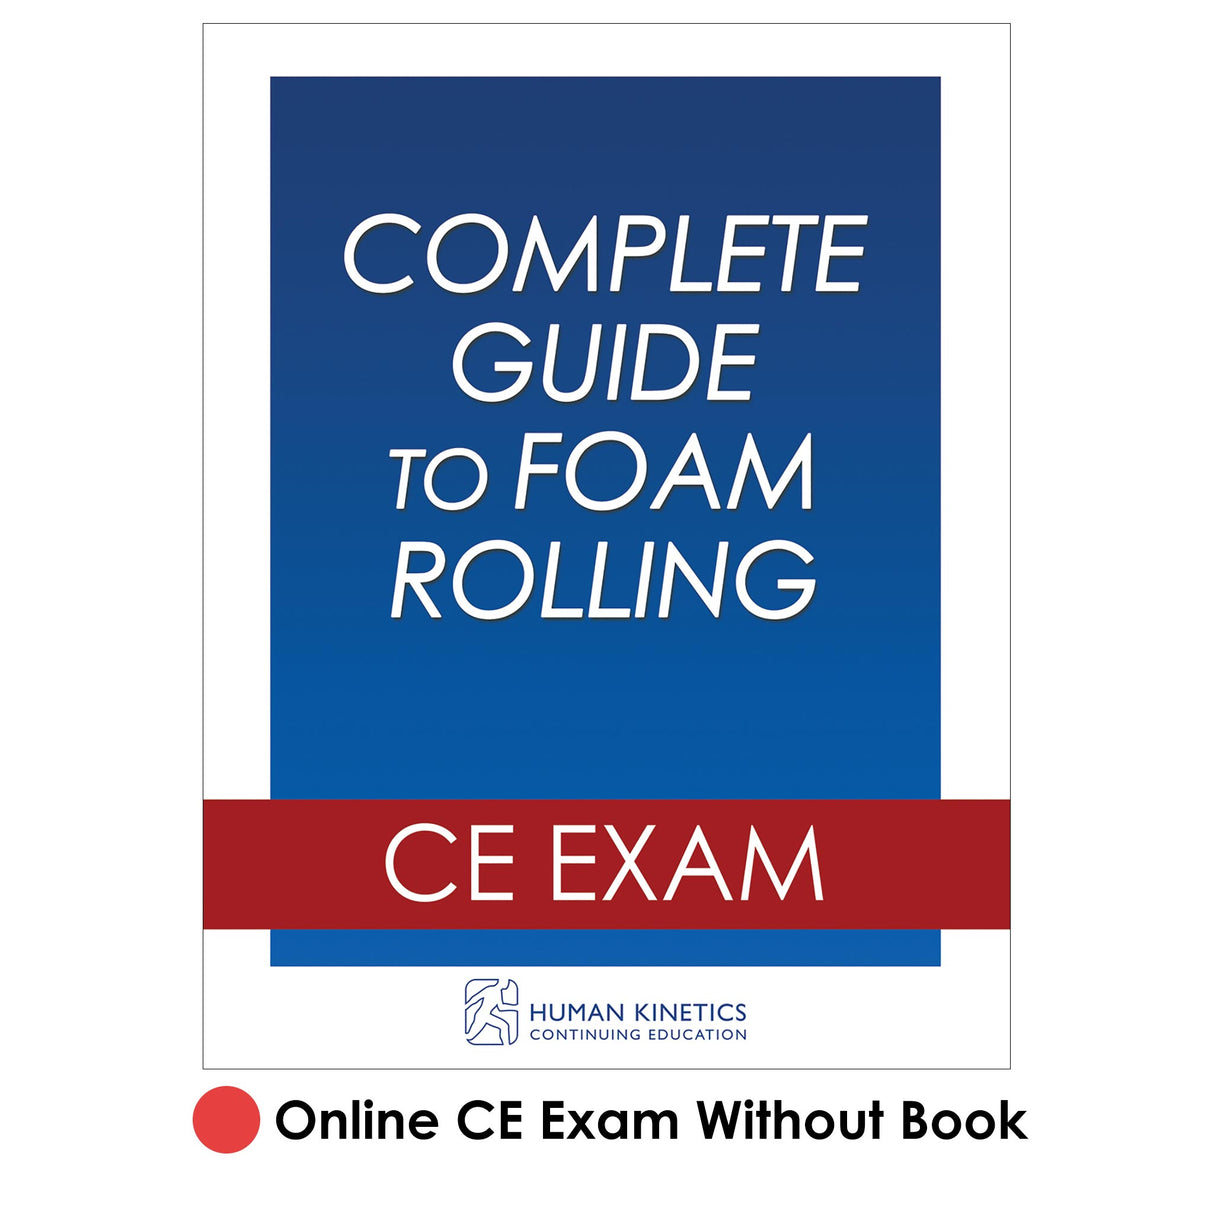 Complete Guide to Foam Rolling Online CE Exam Without Book